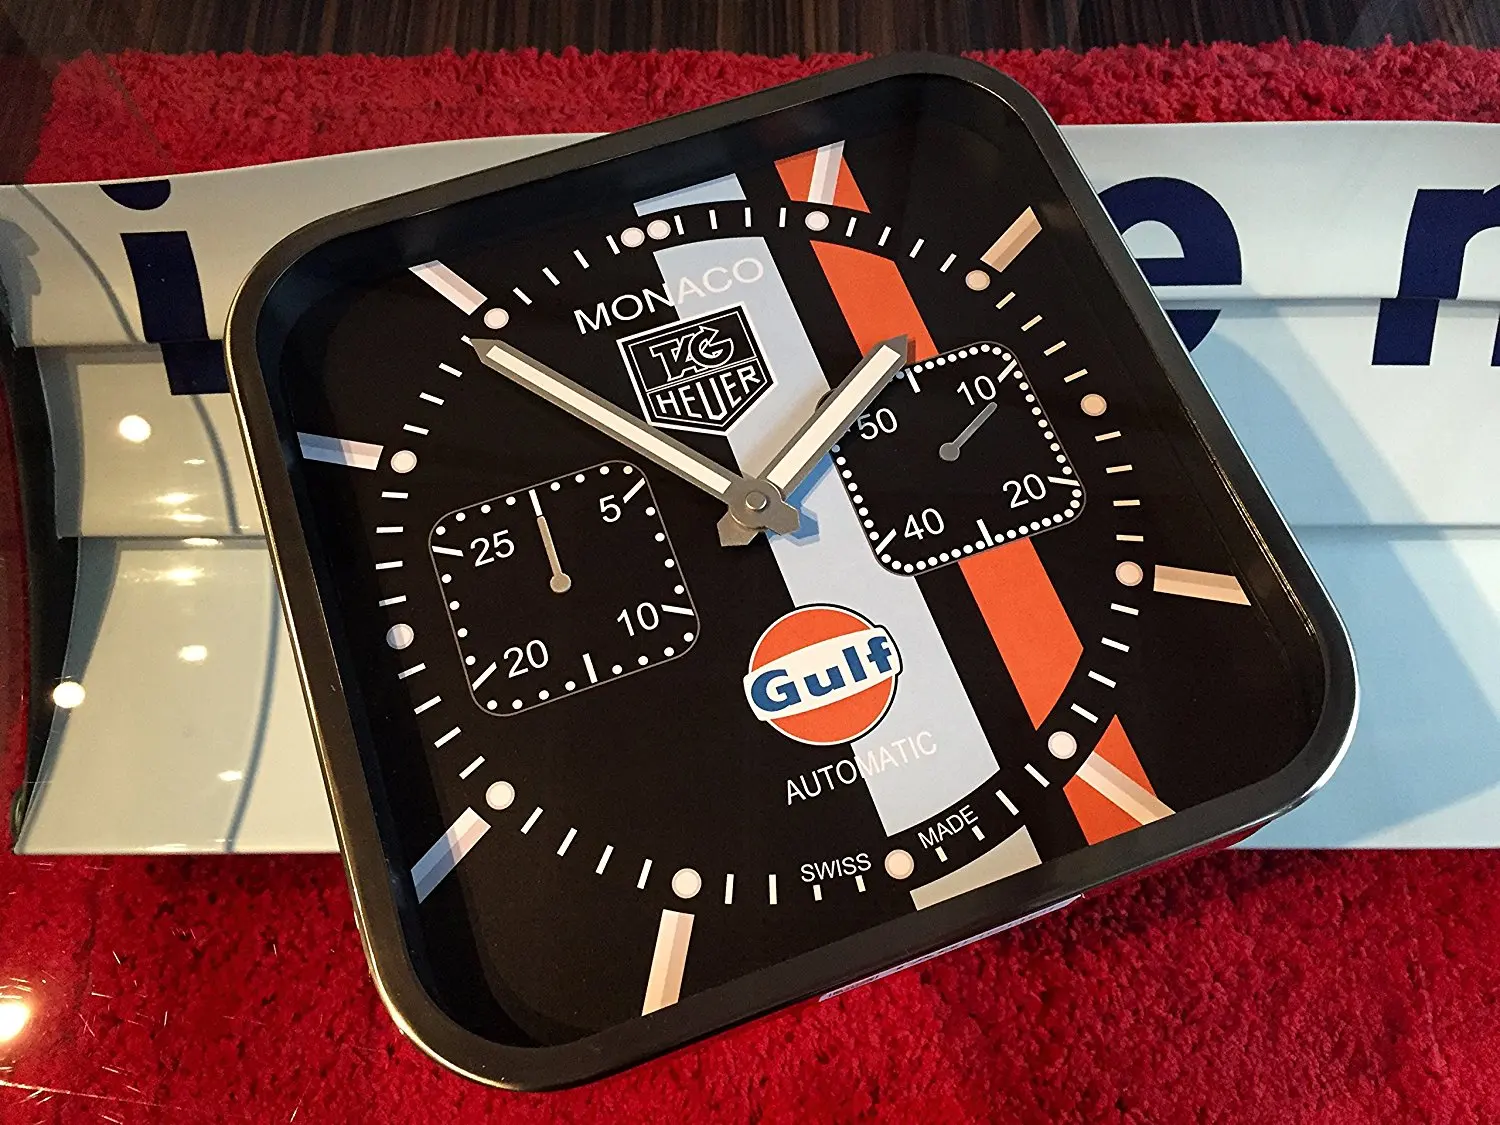 Large Tag Heuer Wall Clock Hotsell - Www.Edoc.Com.Vn 1693673278